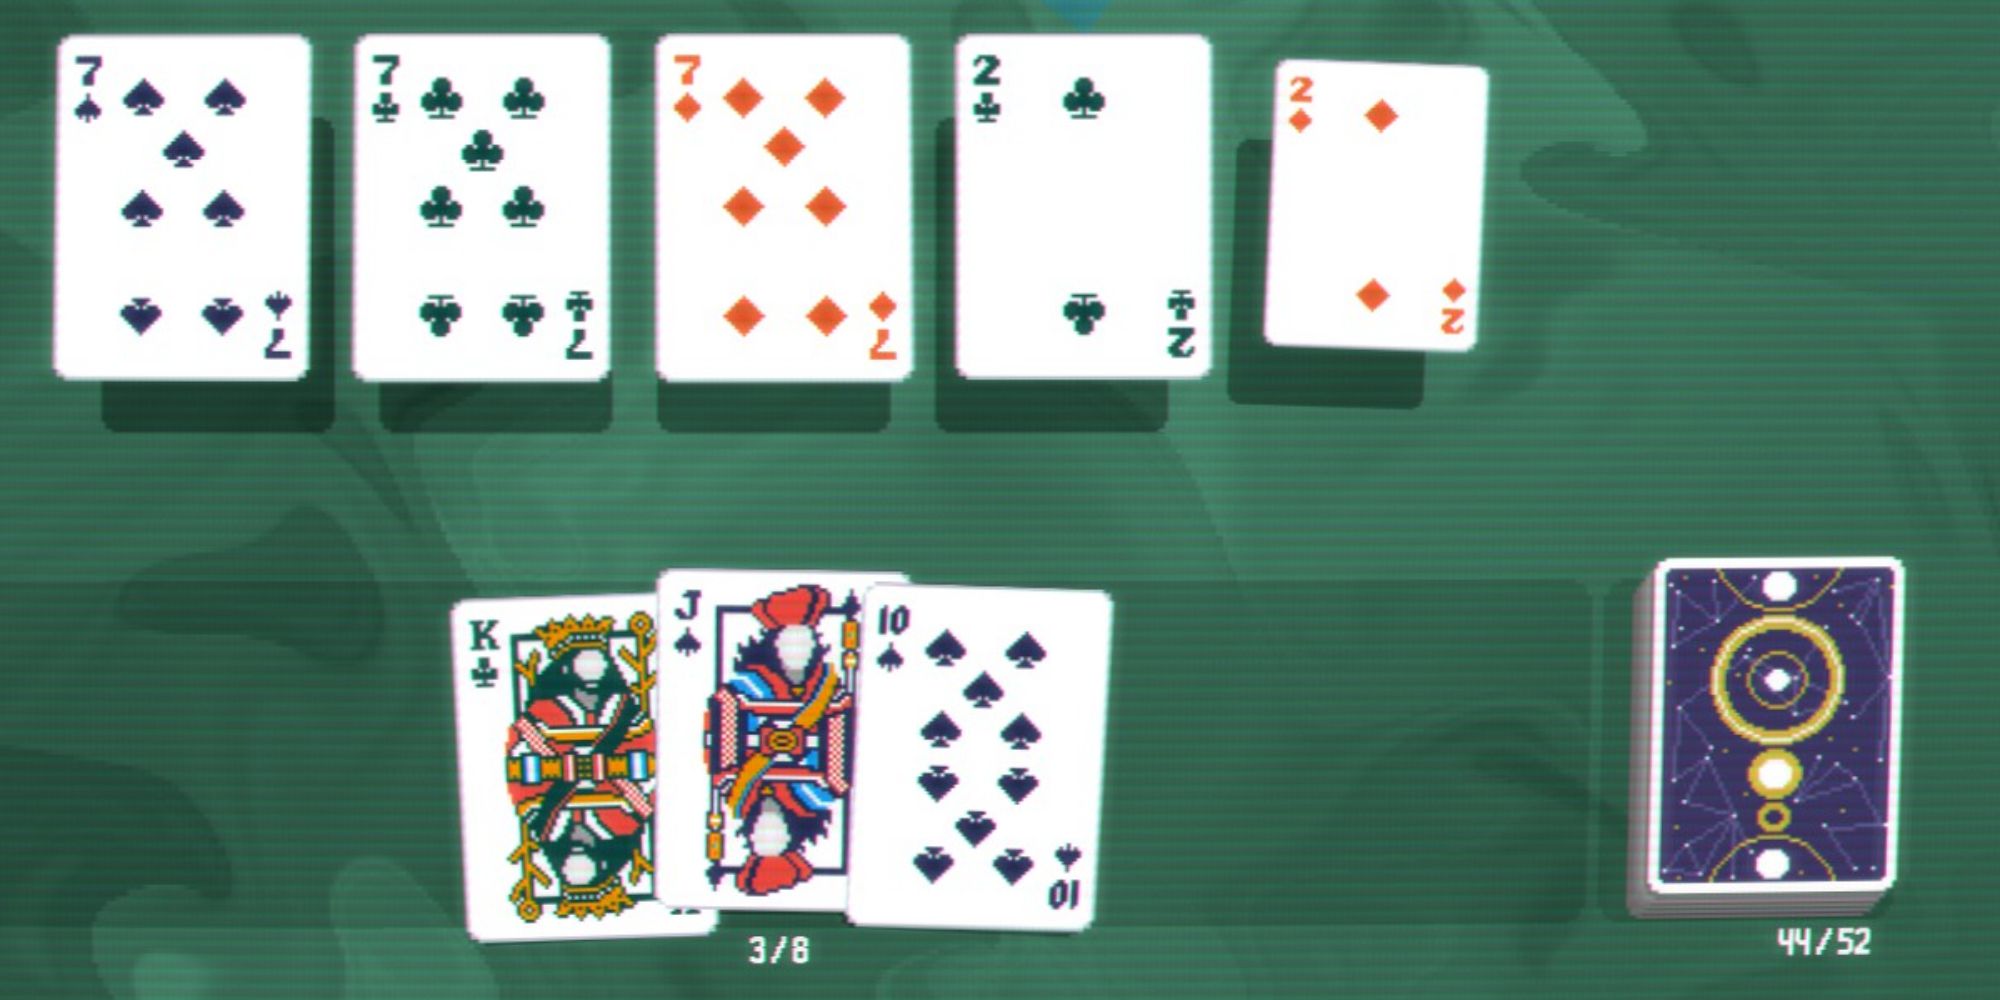 A screenshot from Balatro showing a Full House being played, with the Zodiac Deck being visible on the right side of the screen